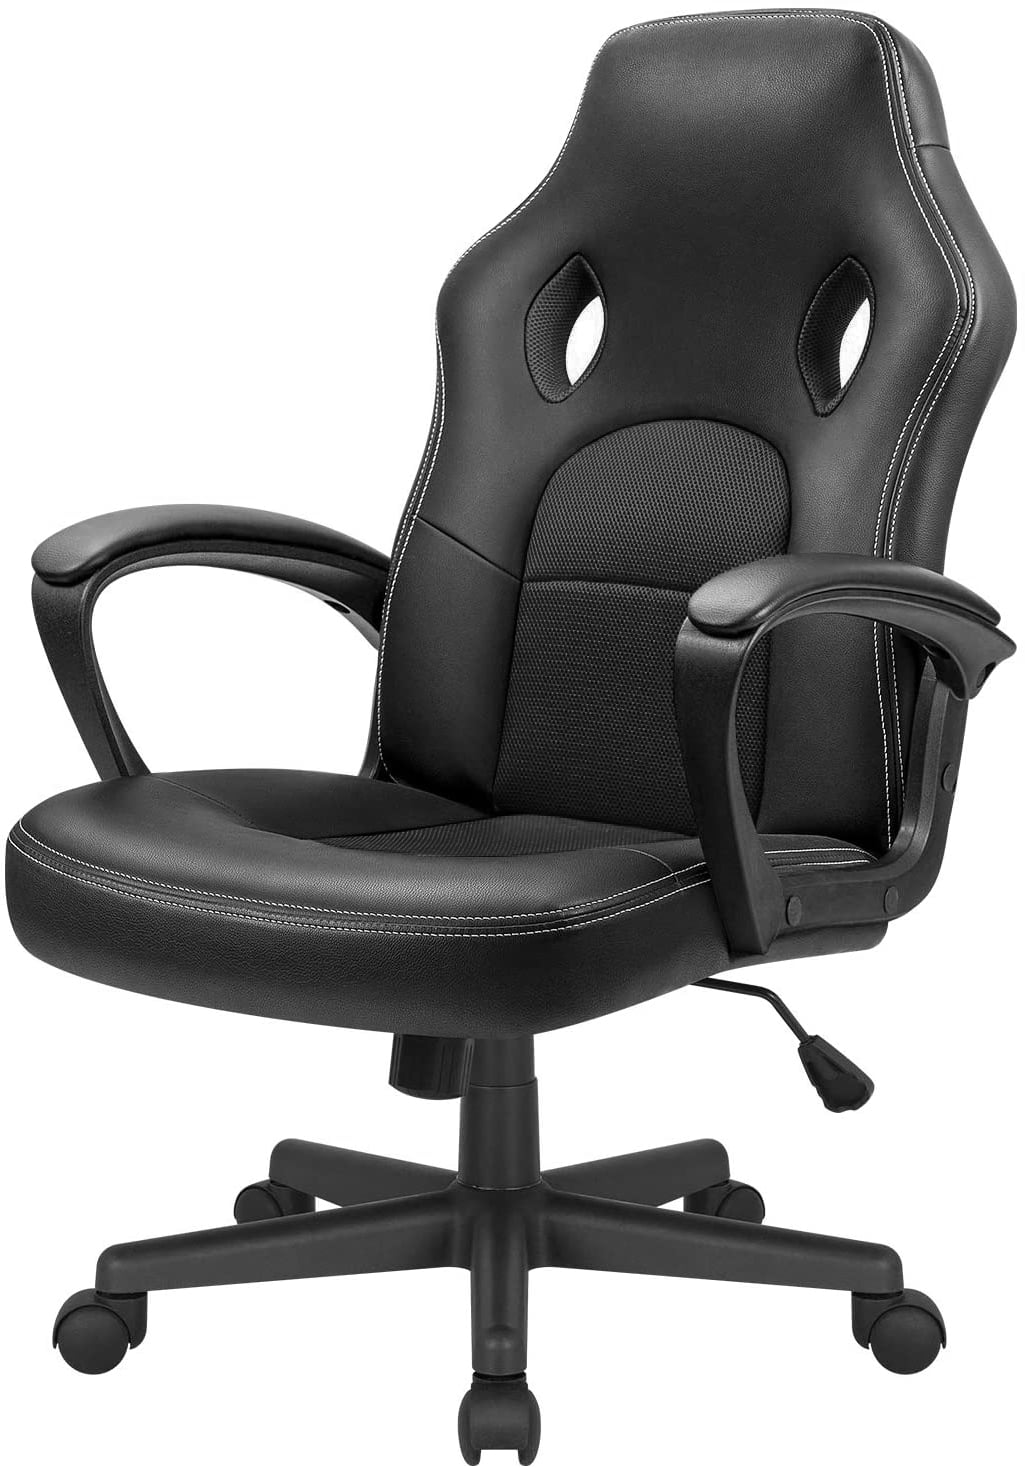 Lacoo Faux Leather Computer Gaming Chair Office Desk Chair with Lumbar ...